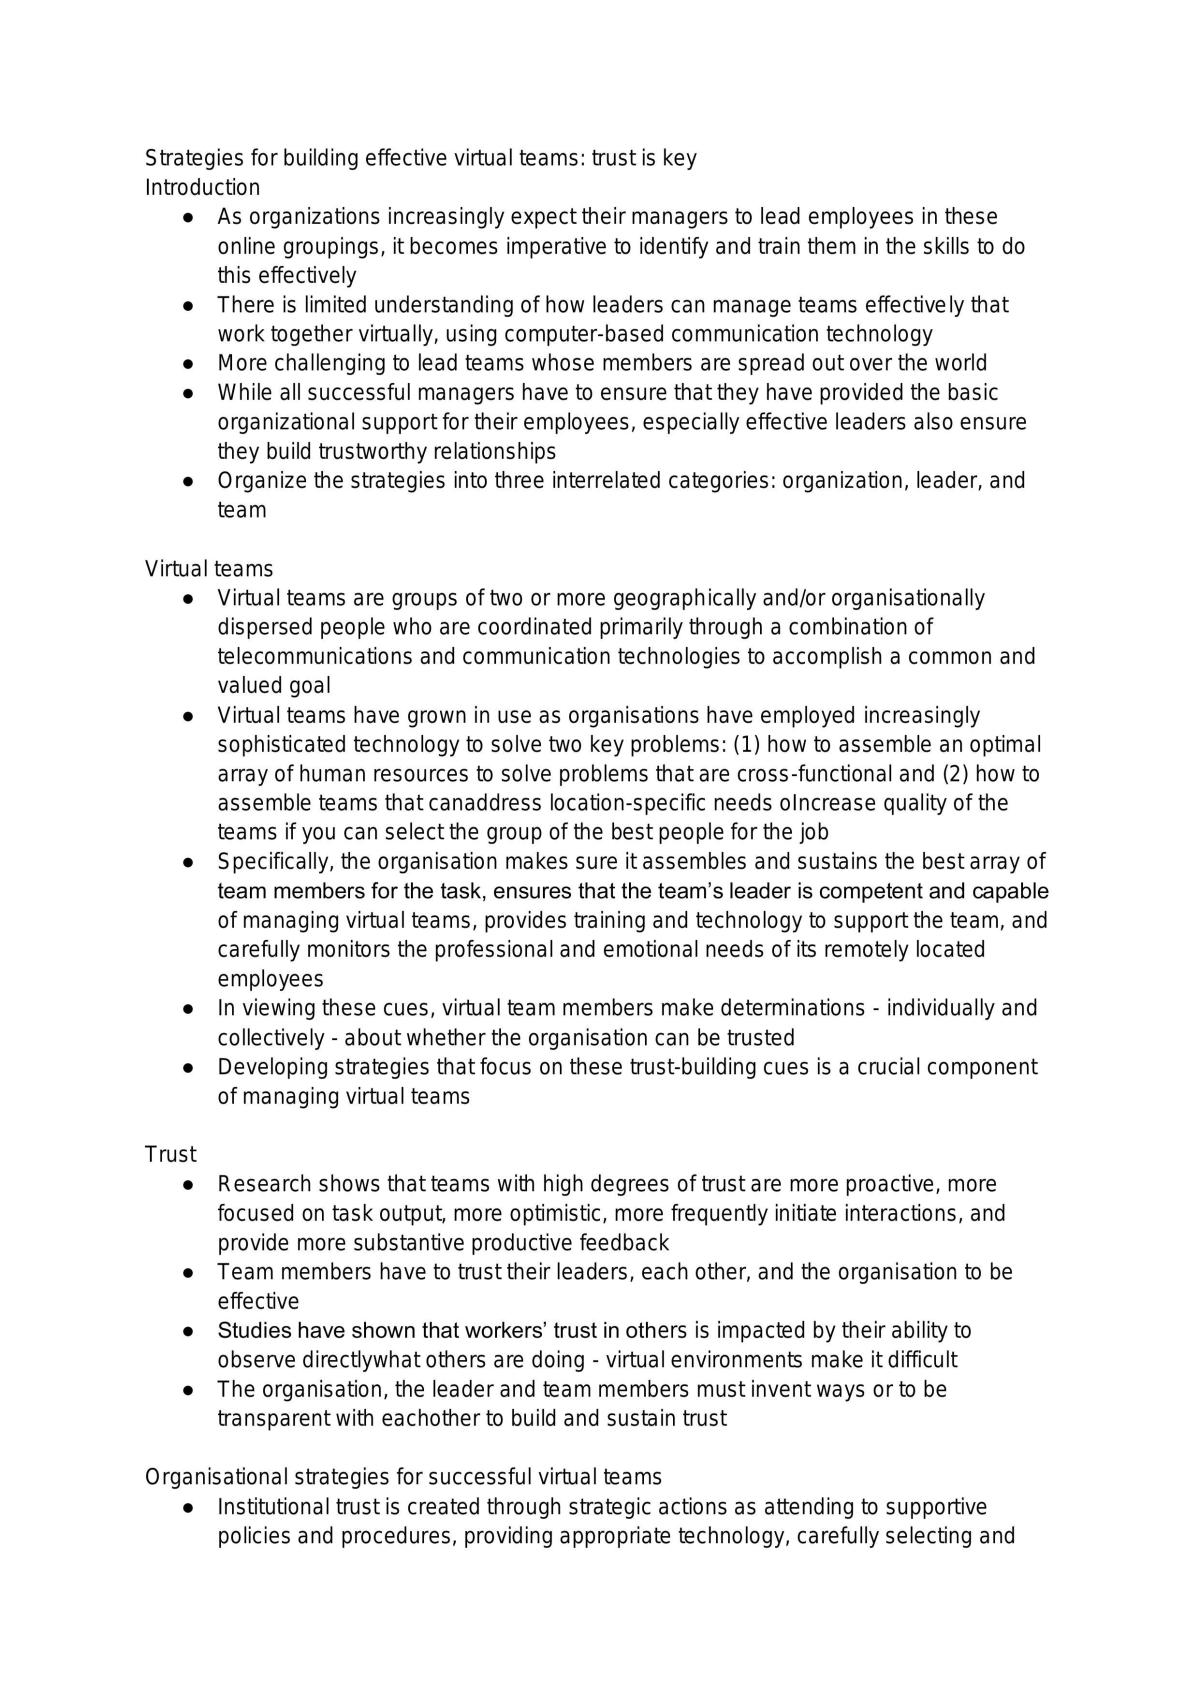 BUSS1000 week 6 reading - Page 1